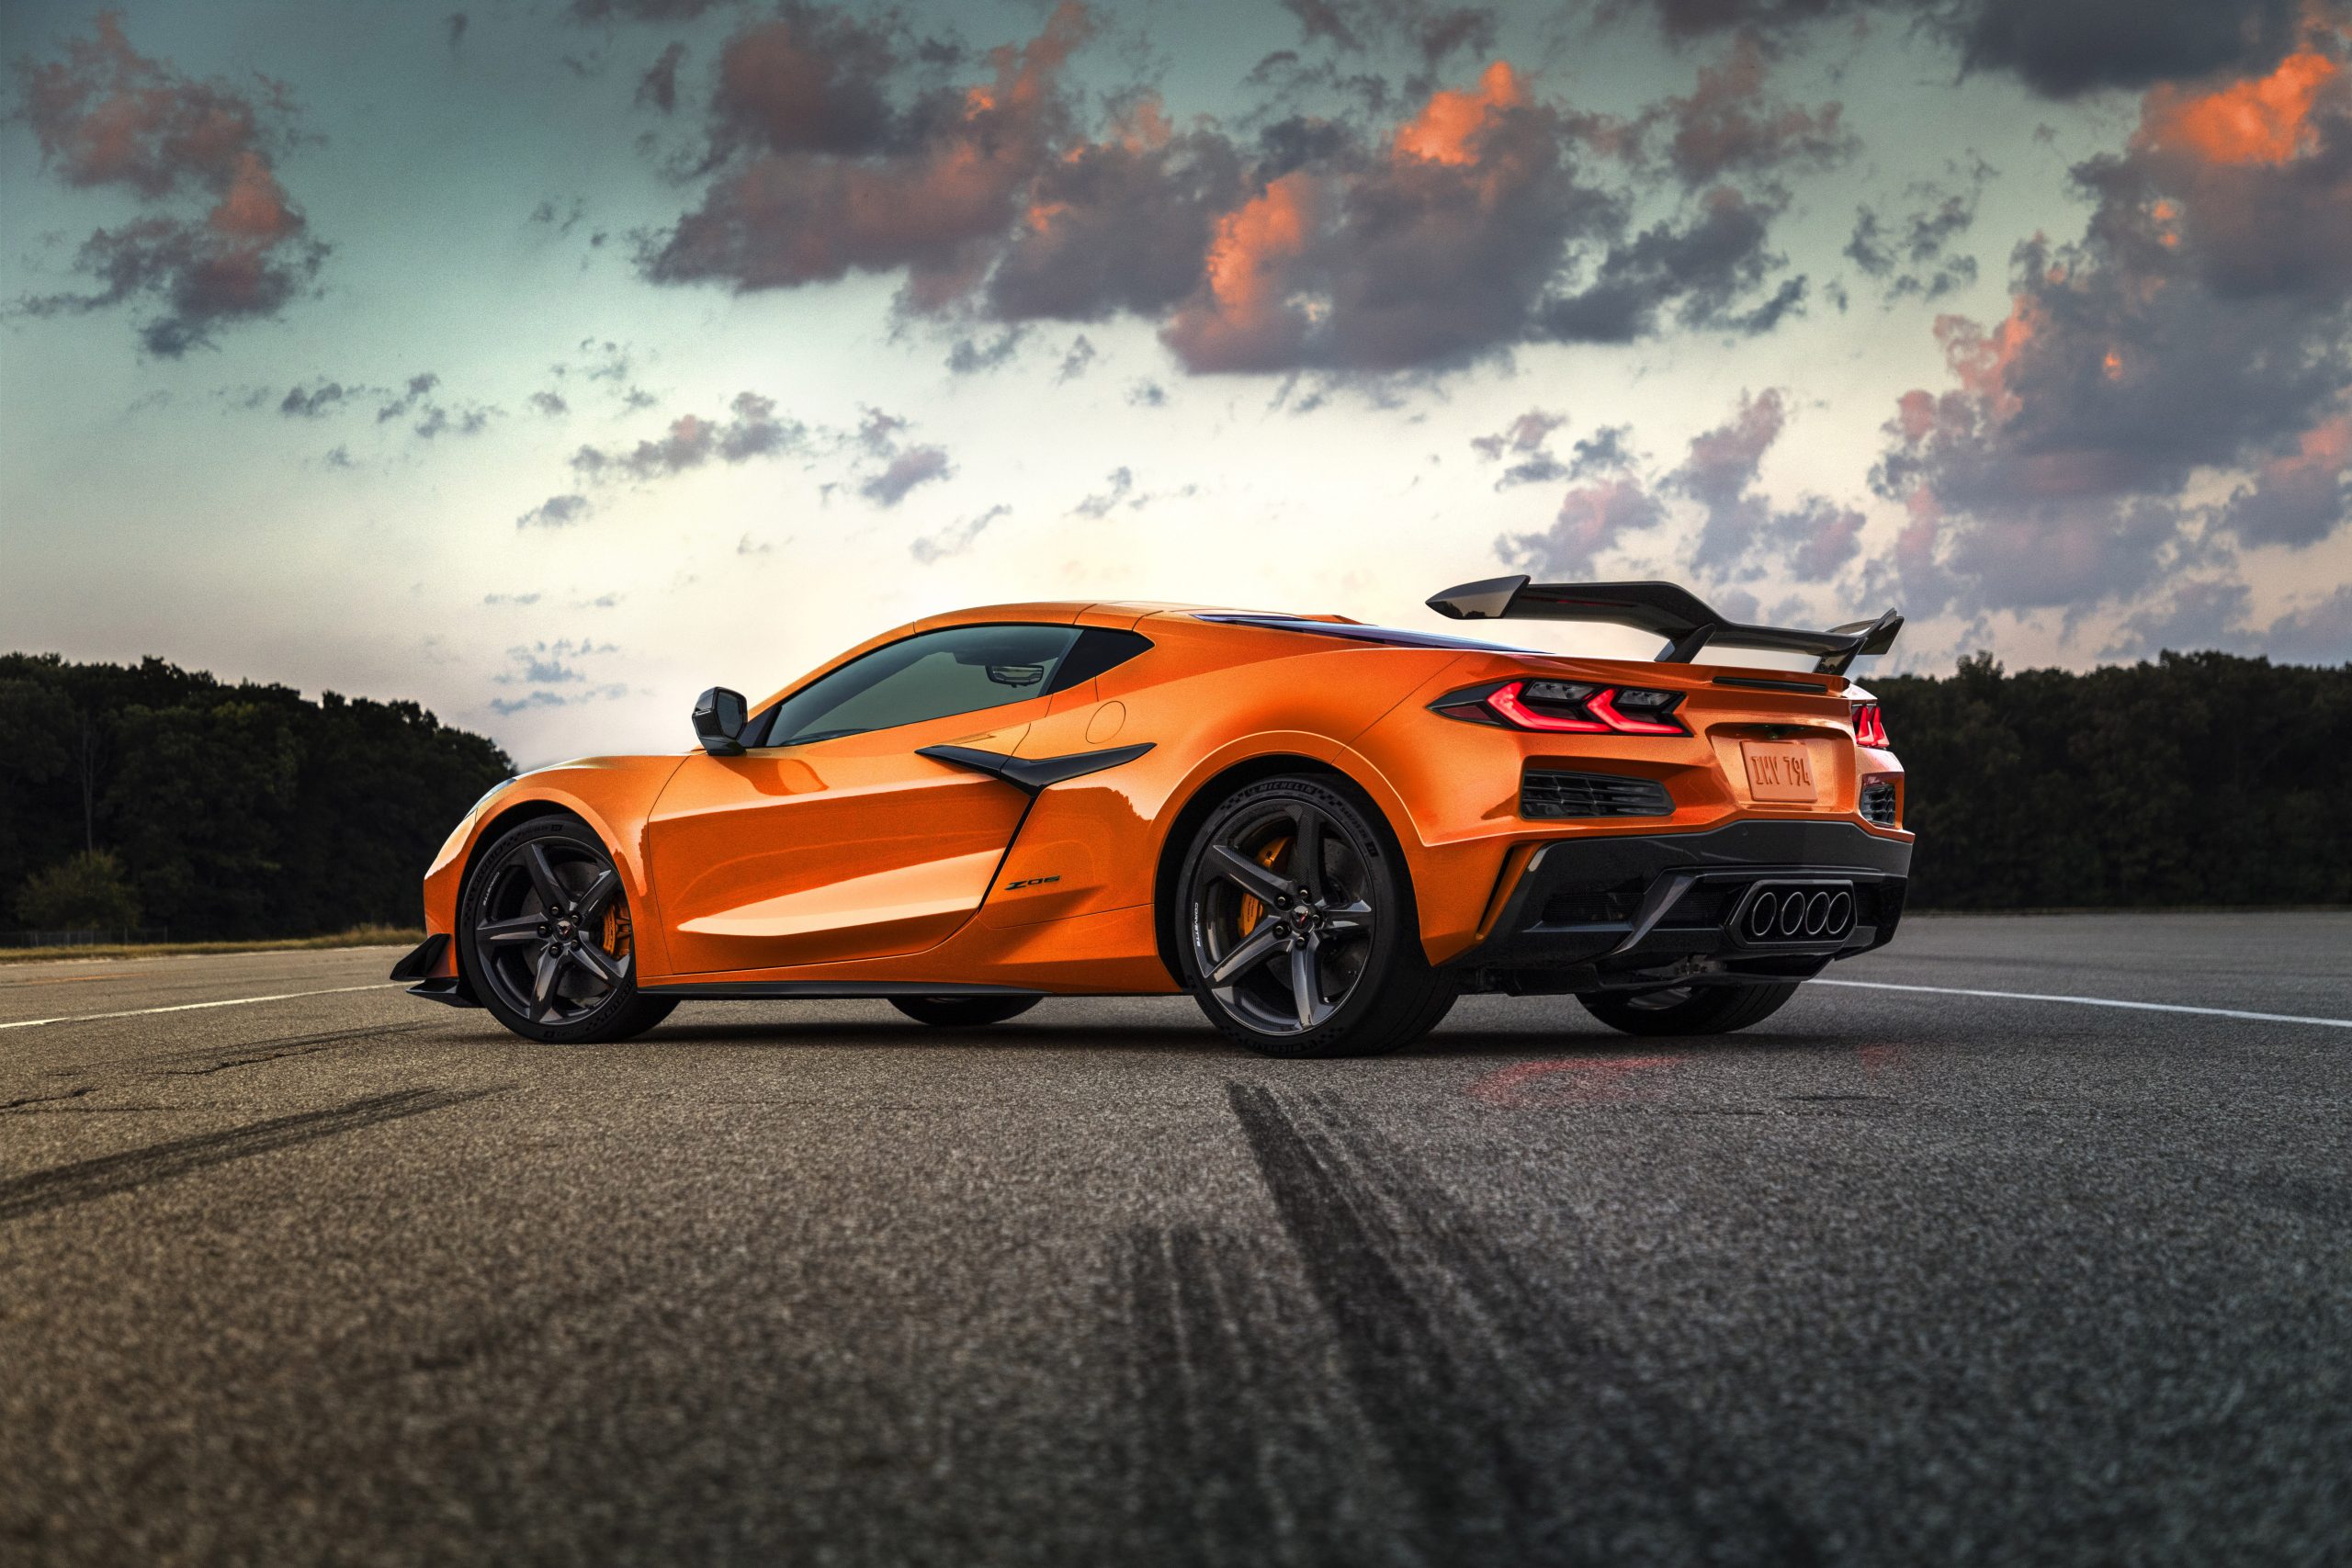 A 3/4 rear view of an orange 2023 Chevrolet Corvette Z06 parked on a road with trees in the background.